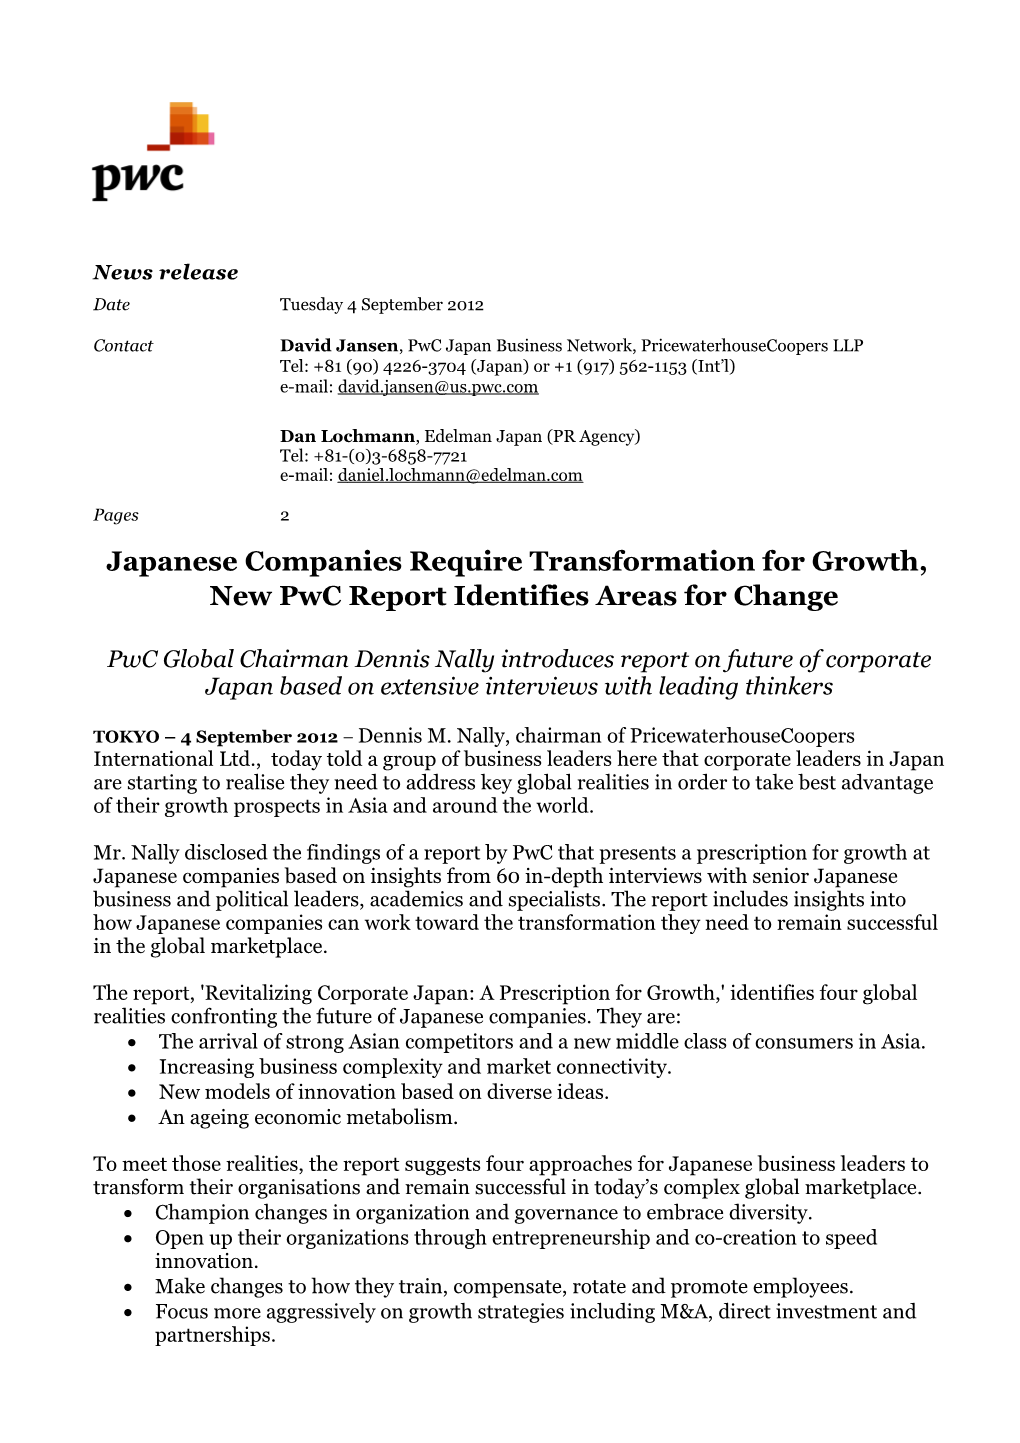 Japanese Companies Require Transformation for Growth